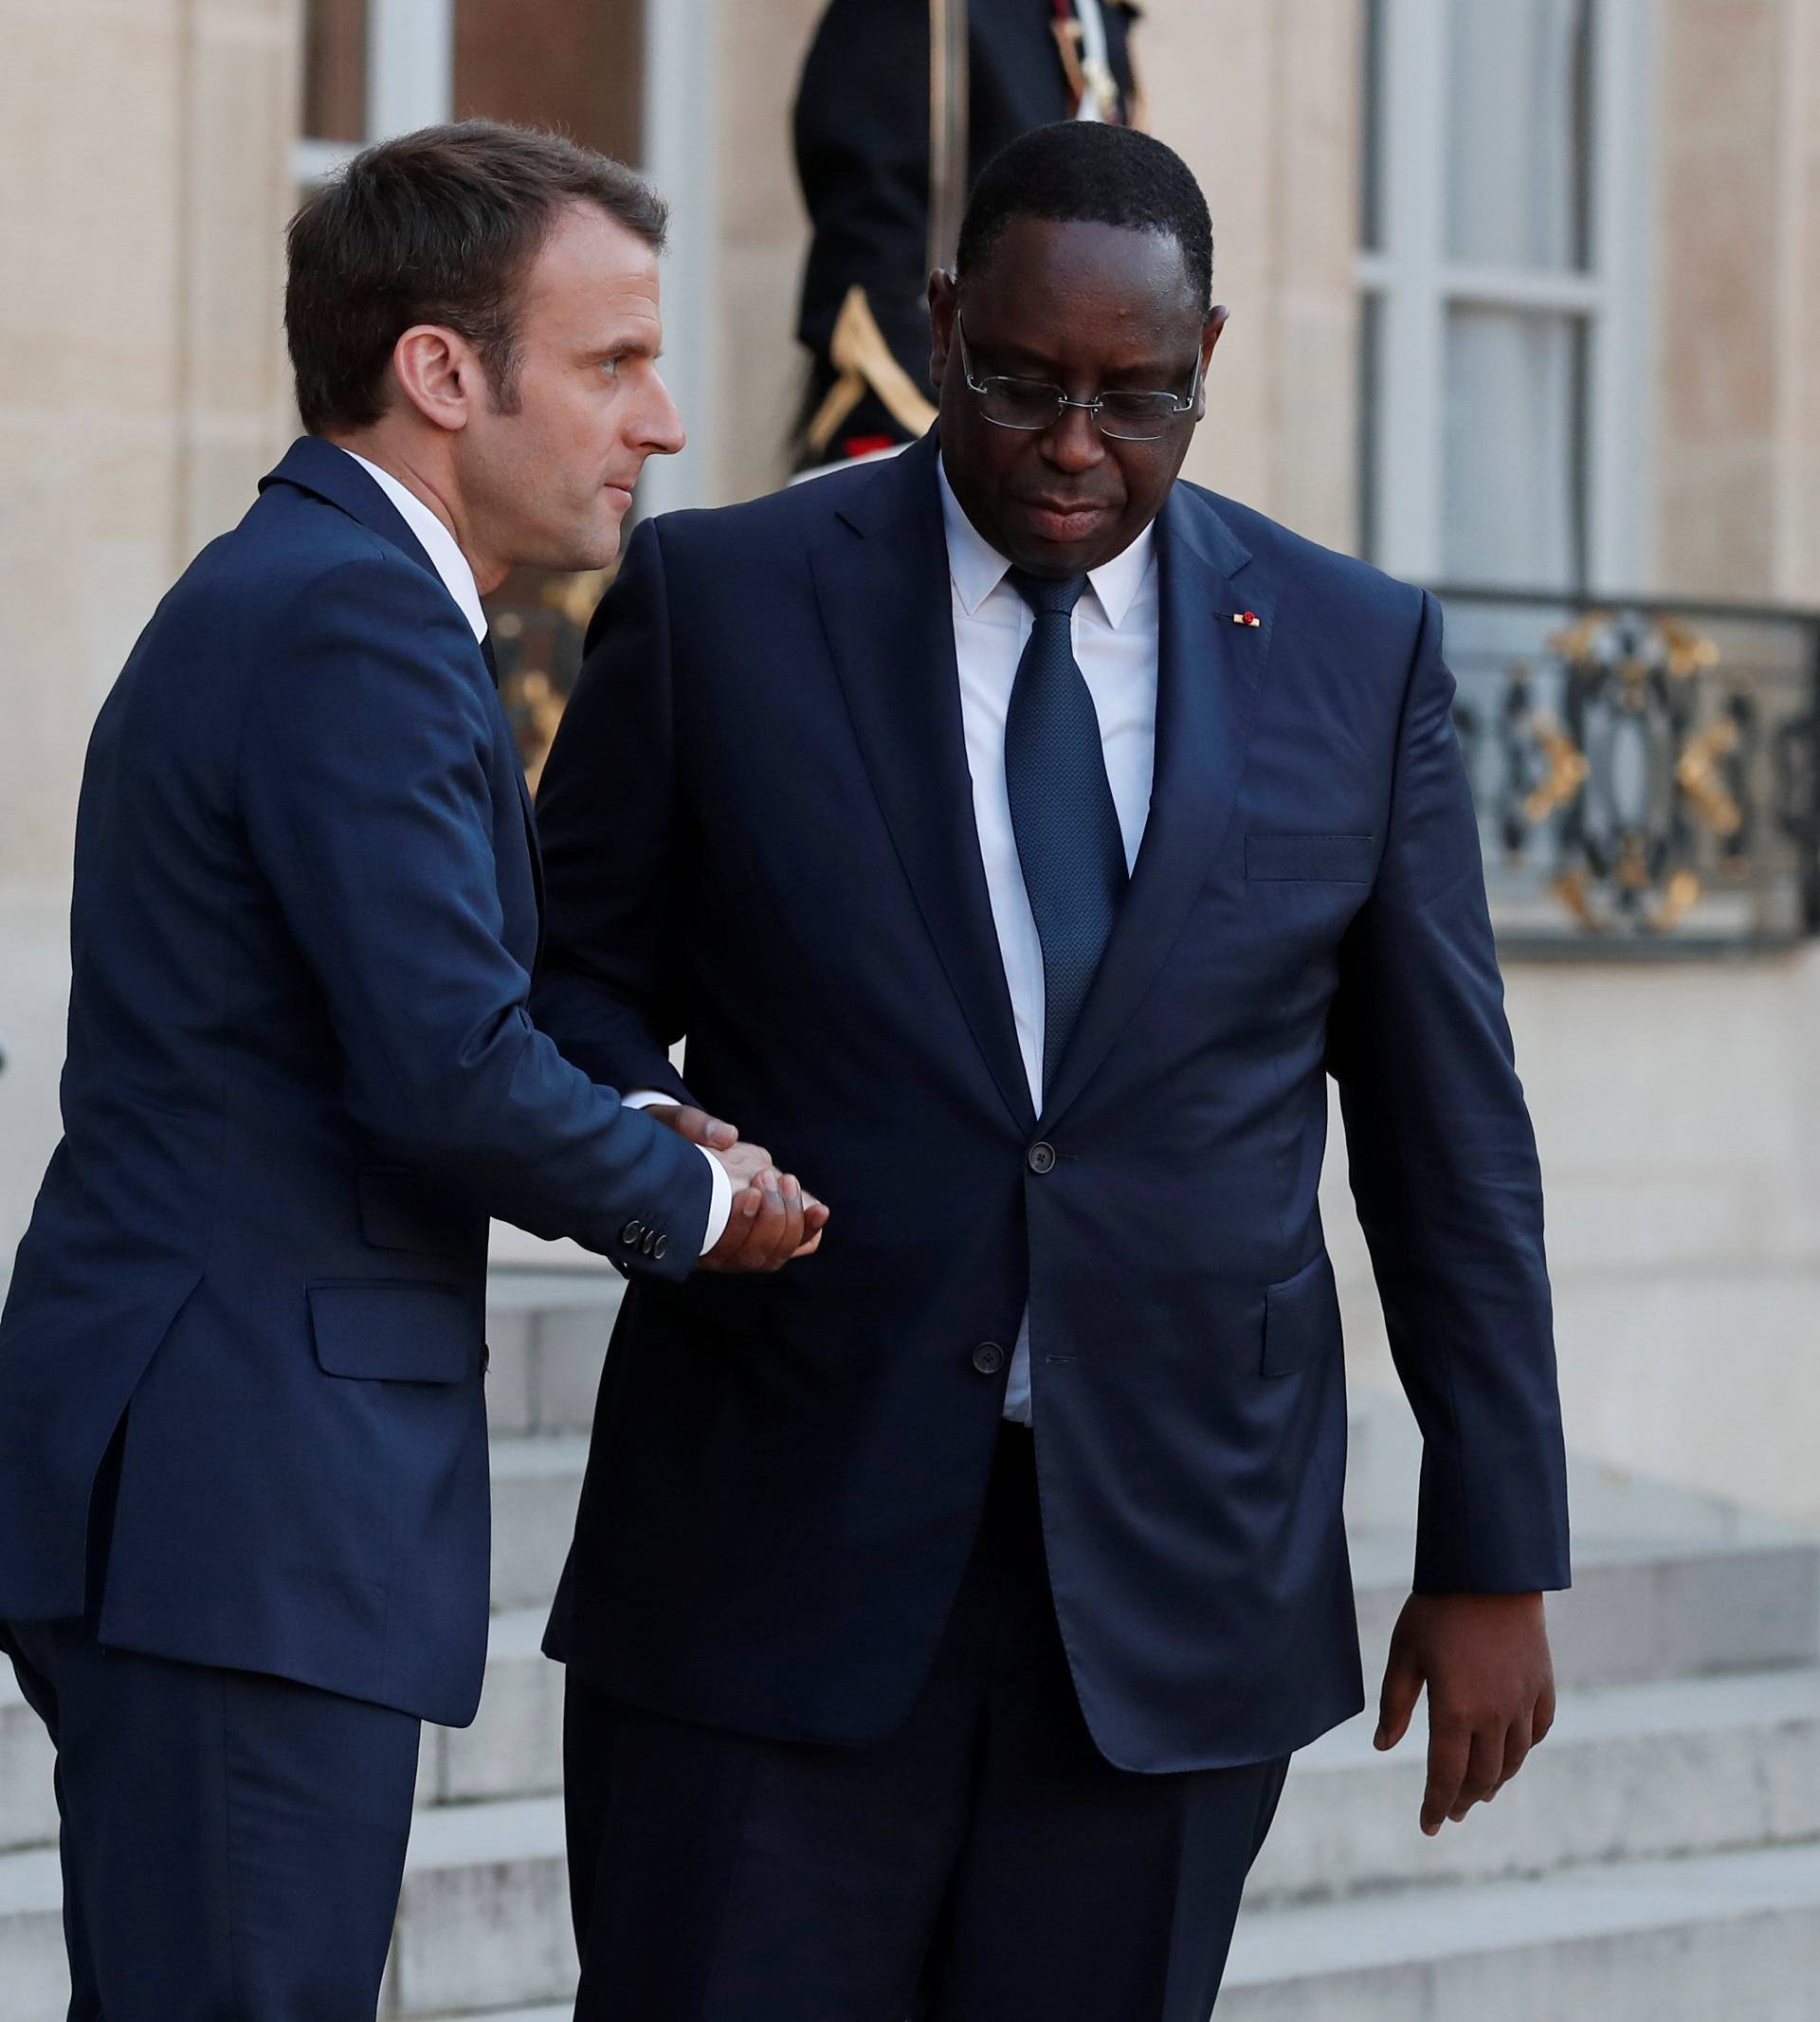 French President Emmanuel Macron accompanies Senegalese President Macky Sall as he leaves the Elysee Palace in Paris